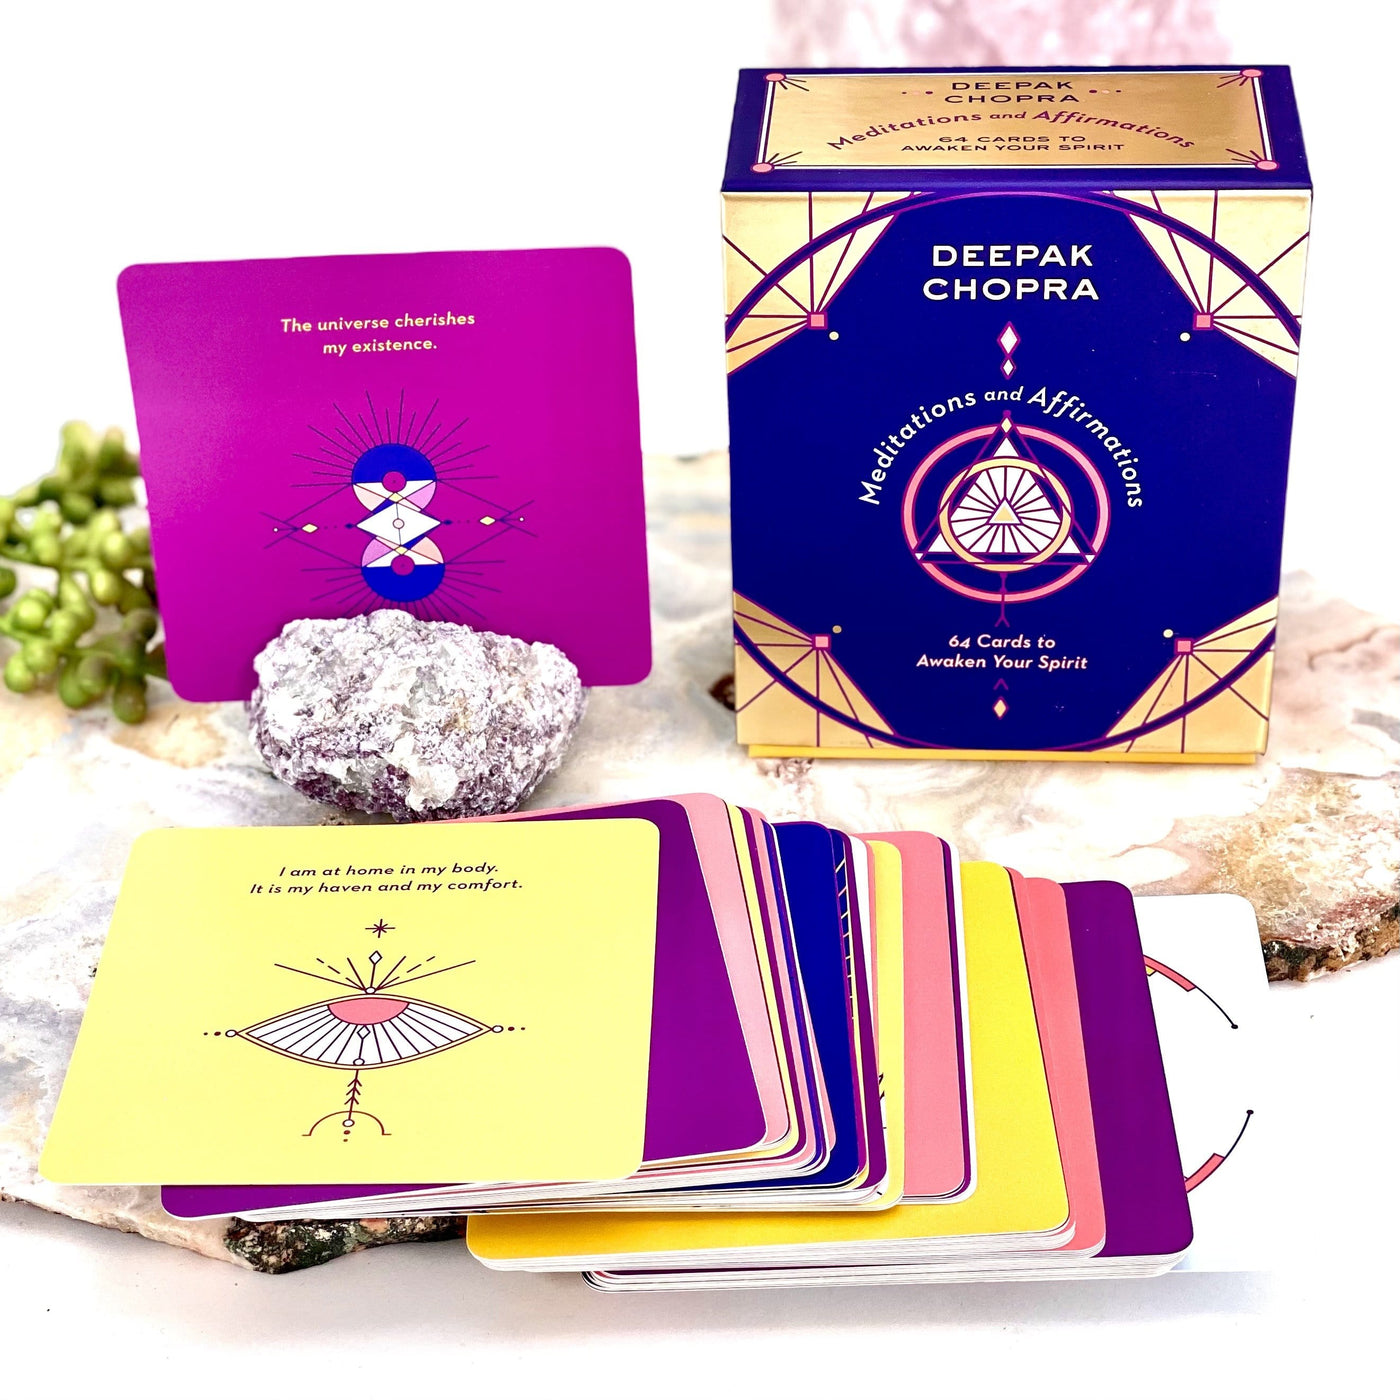 Meditations and Affirmation Card Deck spread out with decorations in the background